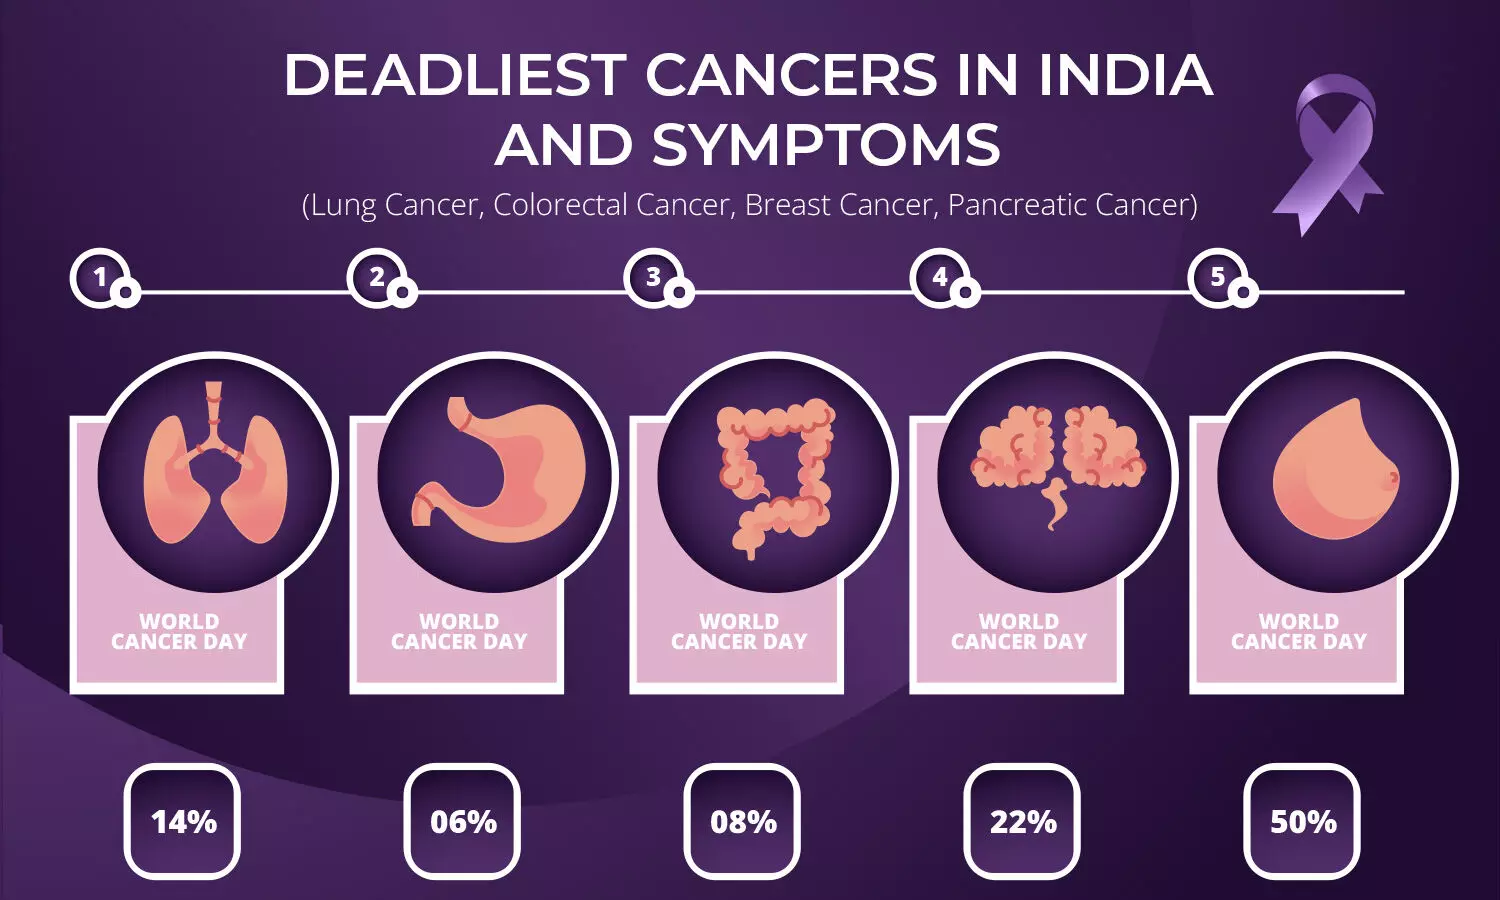 Deadliest cancers in India and symptoms: Impact of deadliest cancers on public health in India